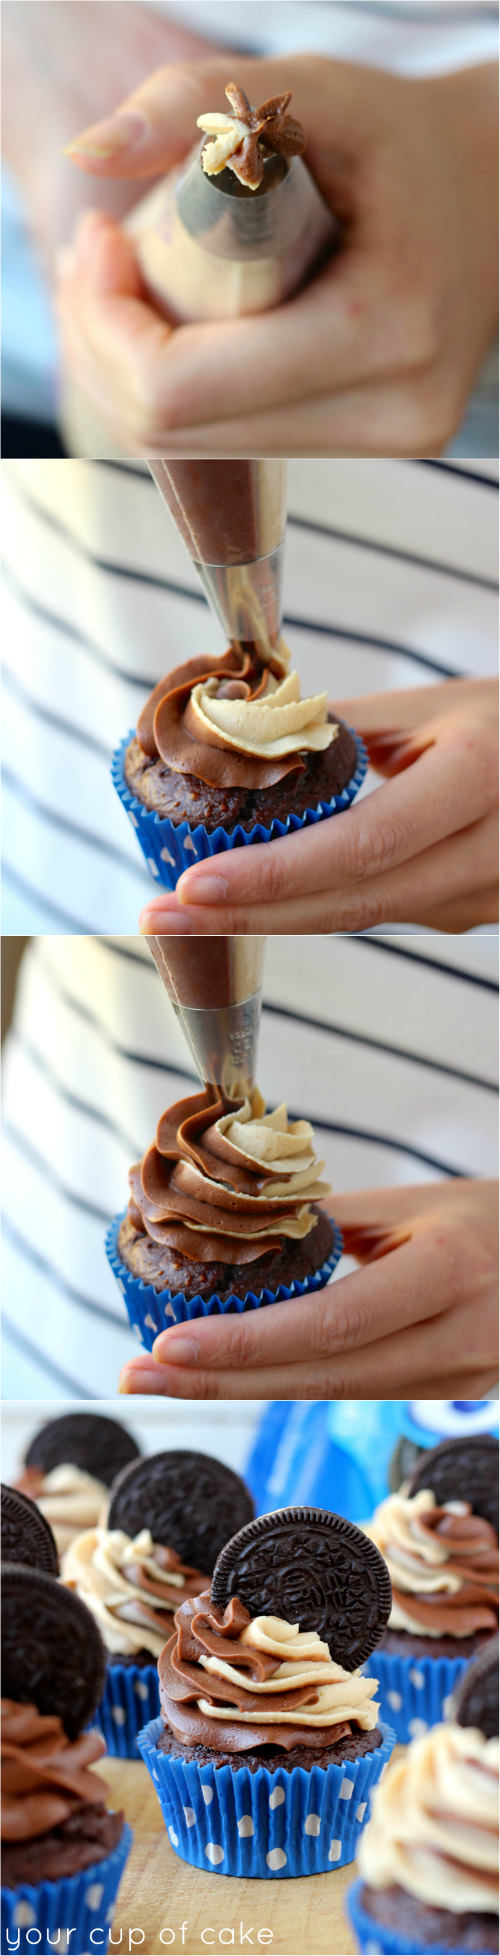 How to pipe swirl frosting cupcakes